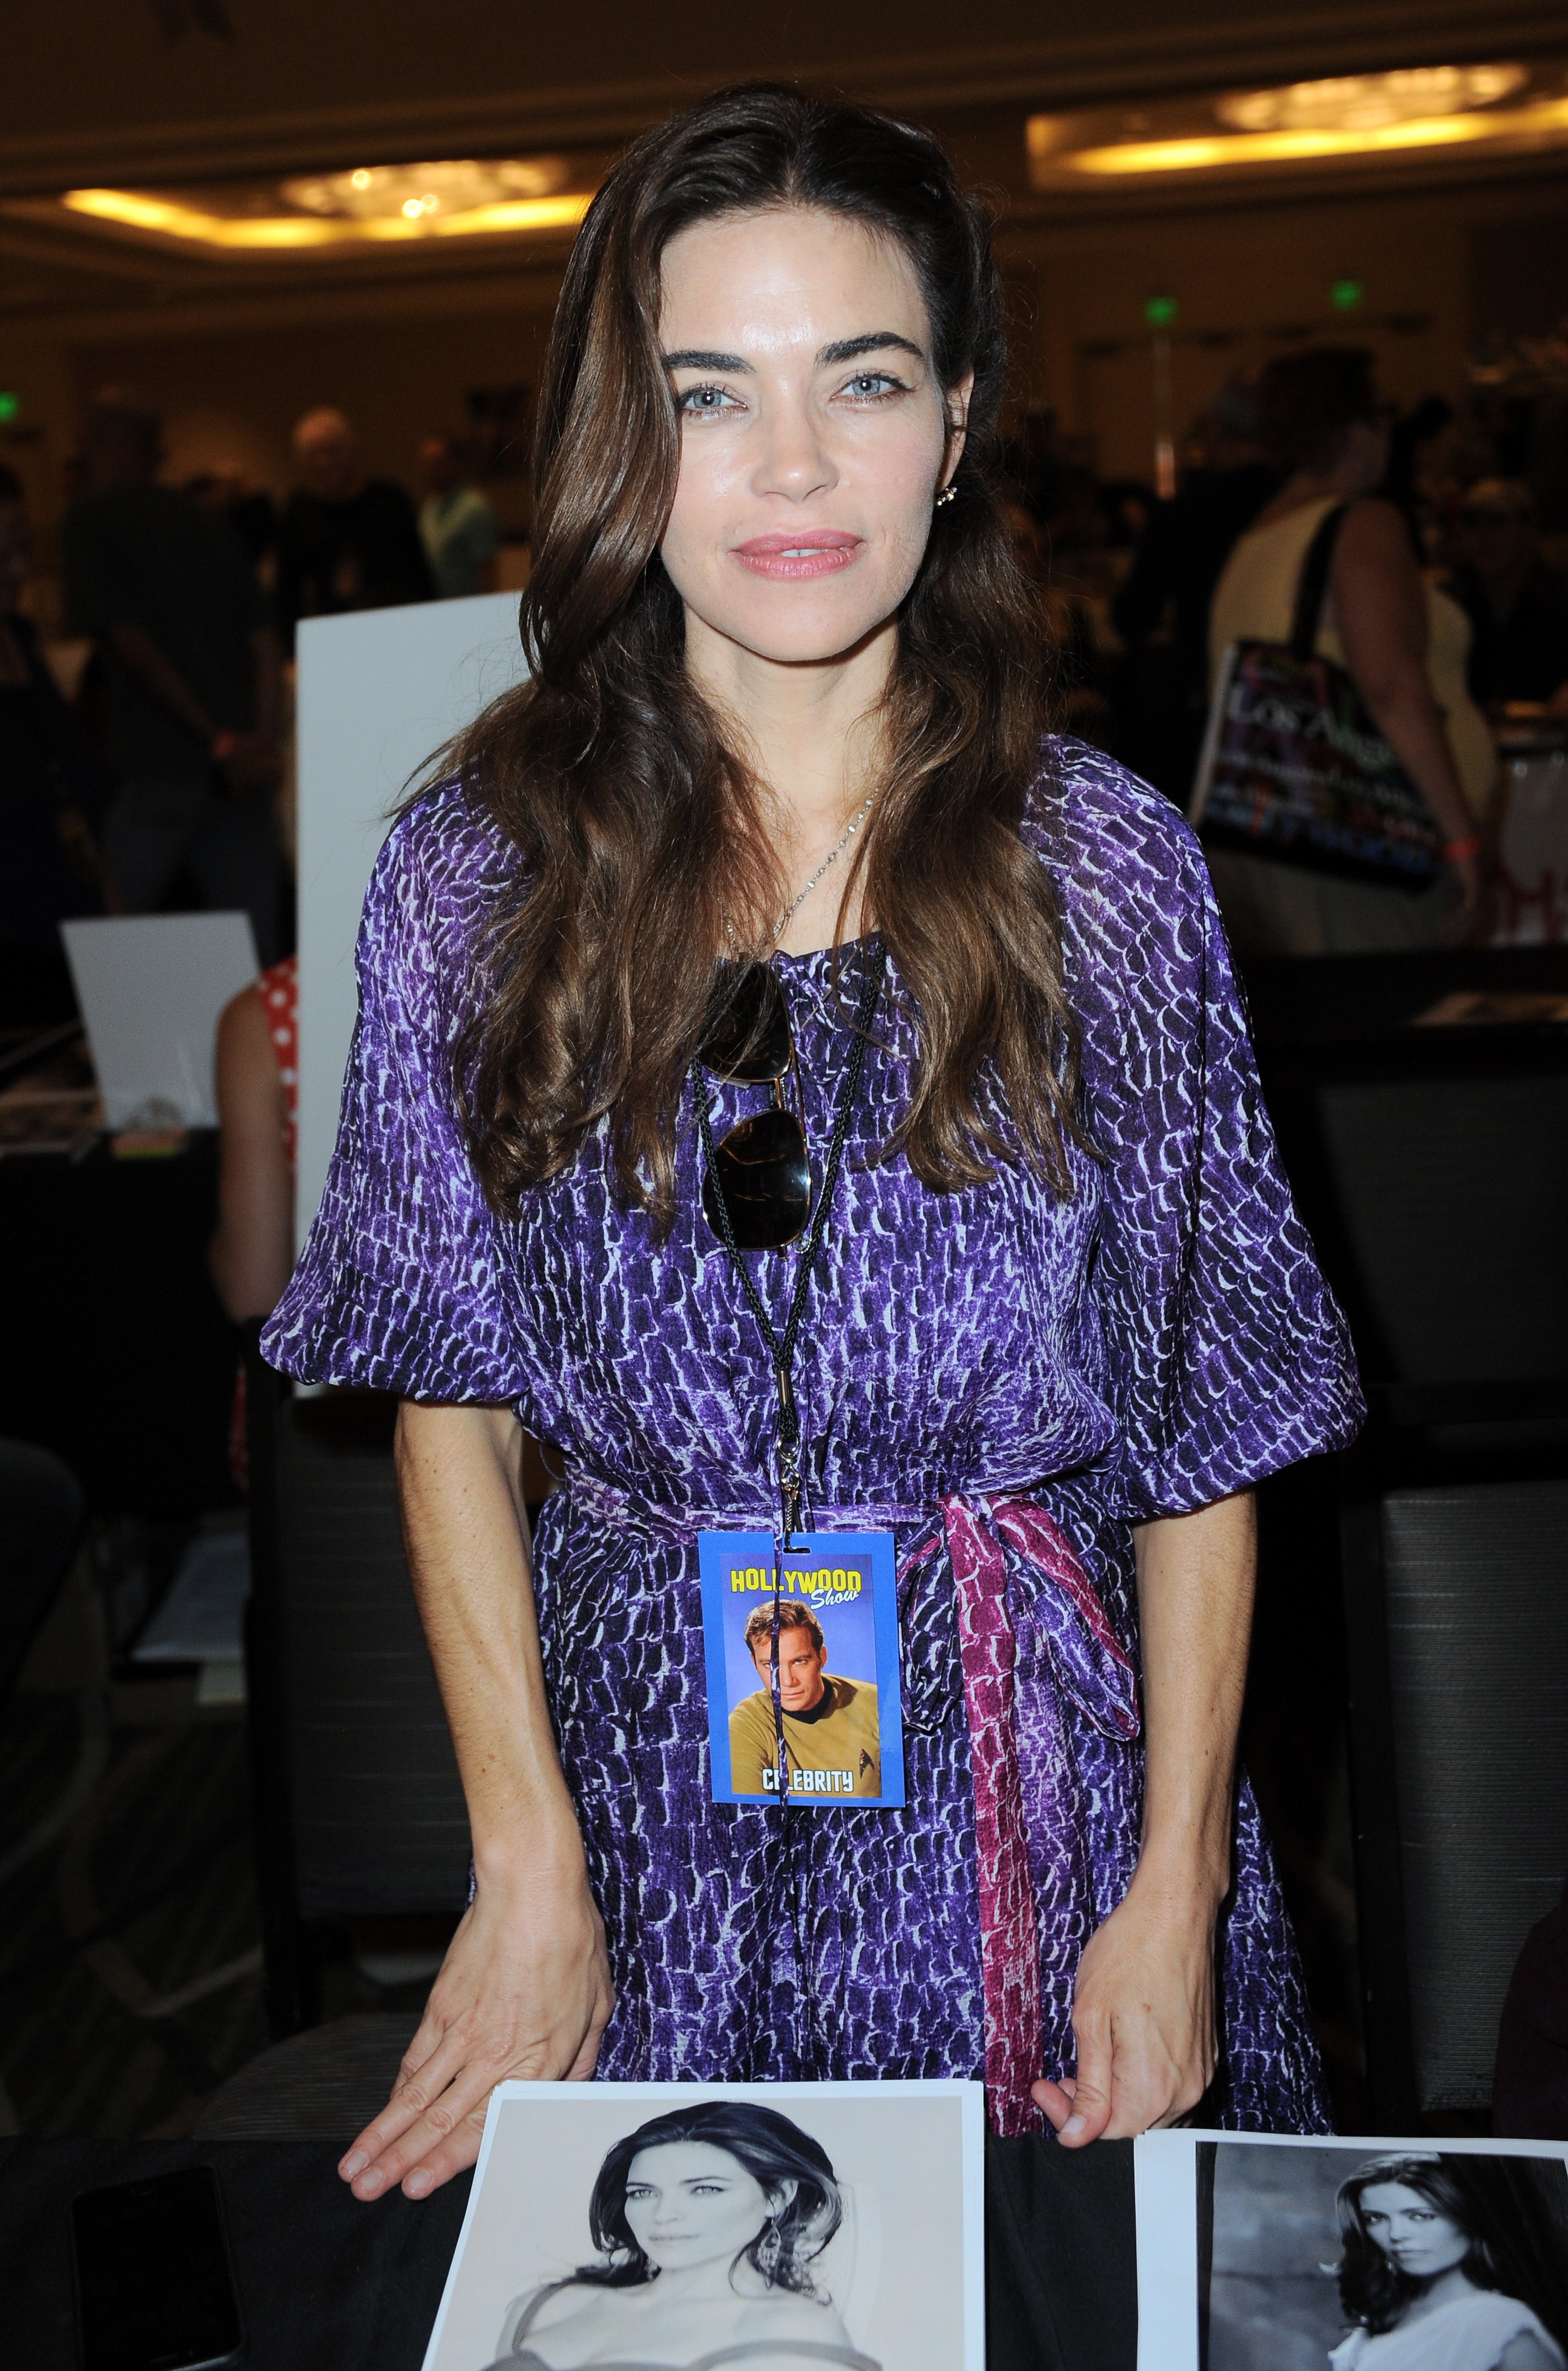  Amelia Heinle on day 1 of The Hollywood Show held at The Westin Hotel LAX on August 1, 2015. | Source: Getty Images